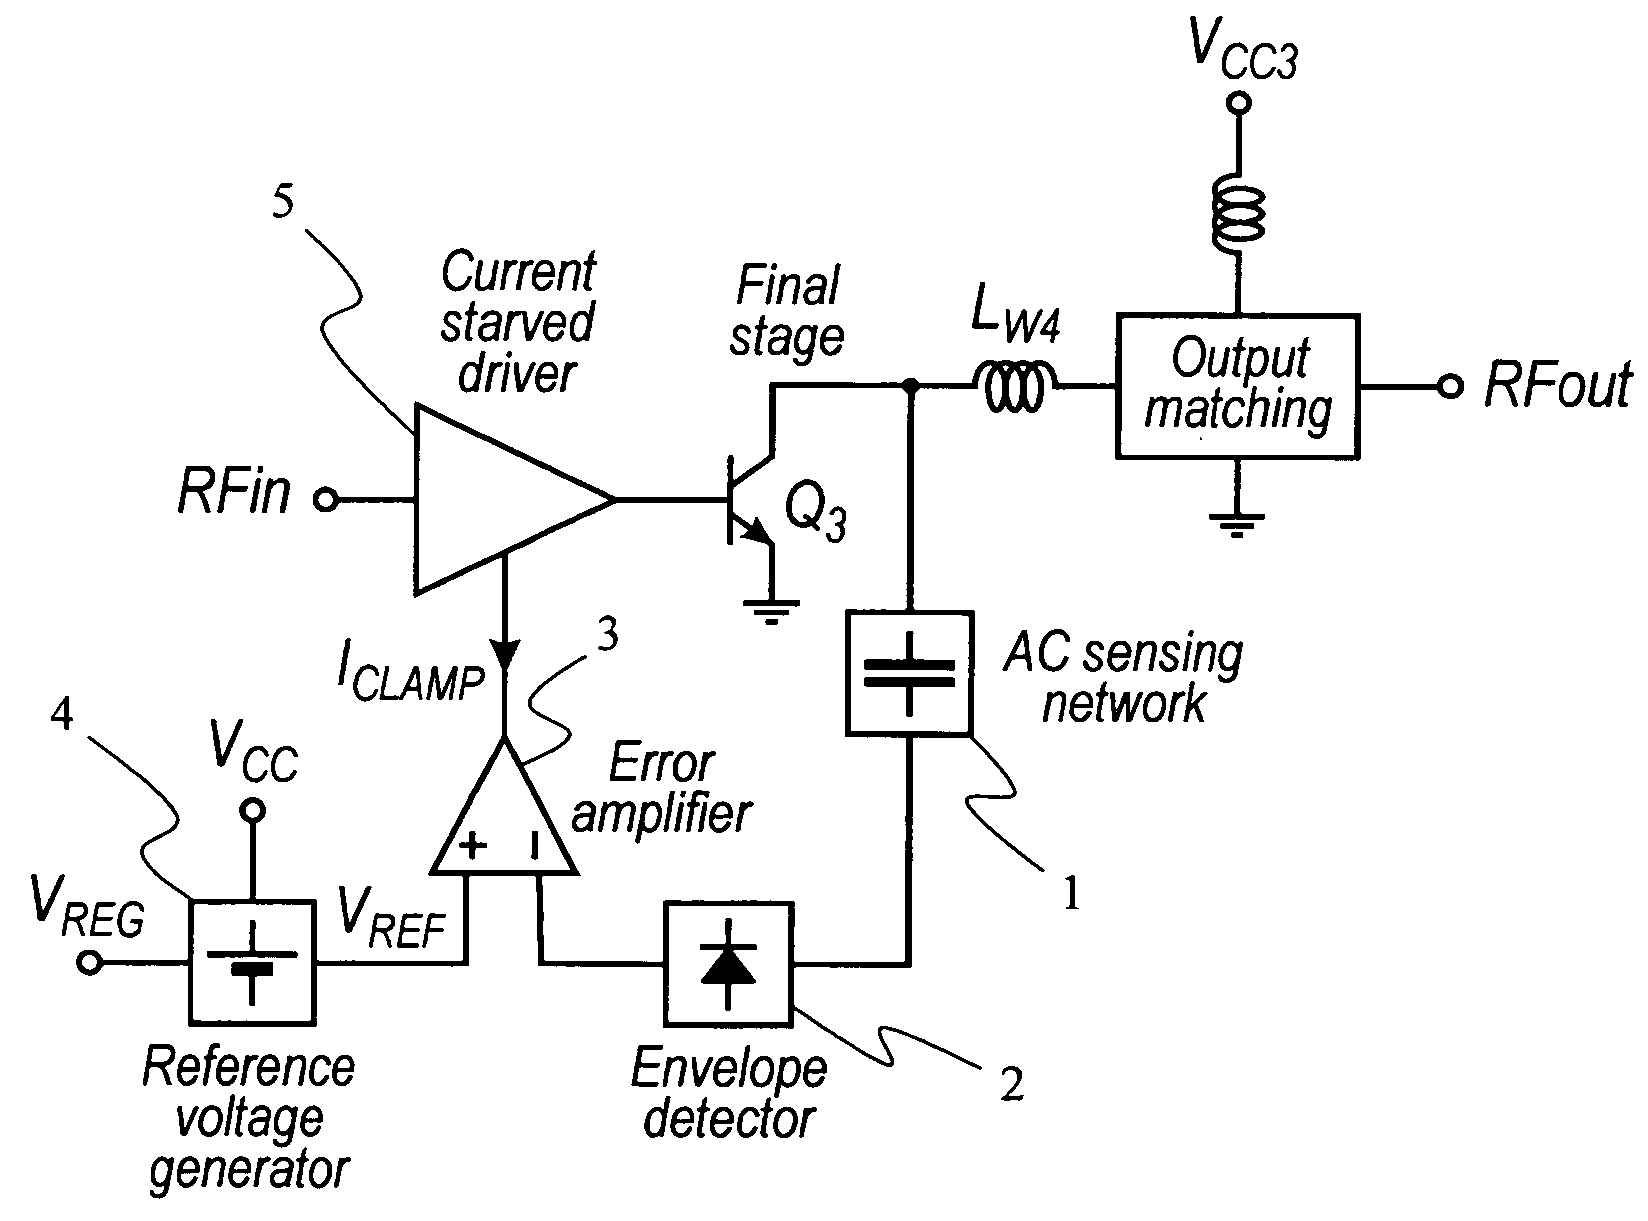 Protection of output stage transistor of an RF power amplifier